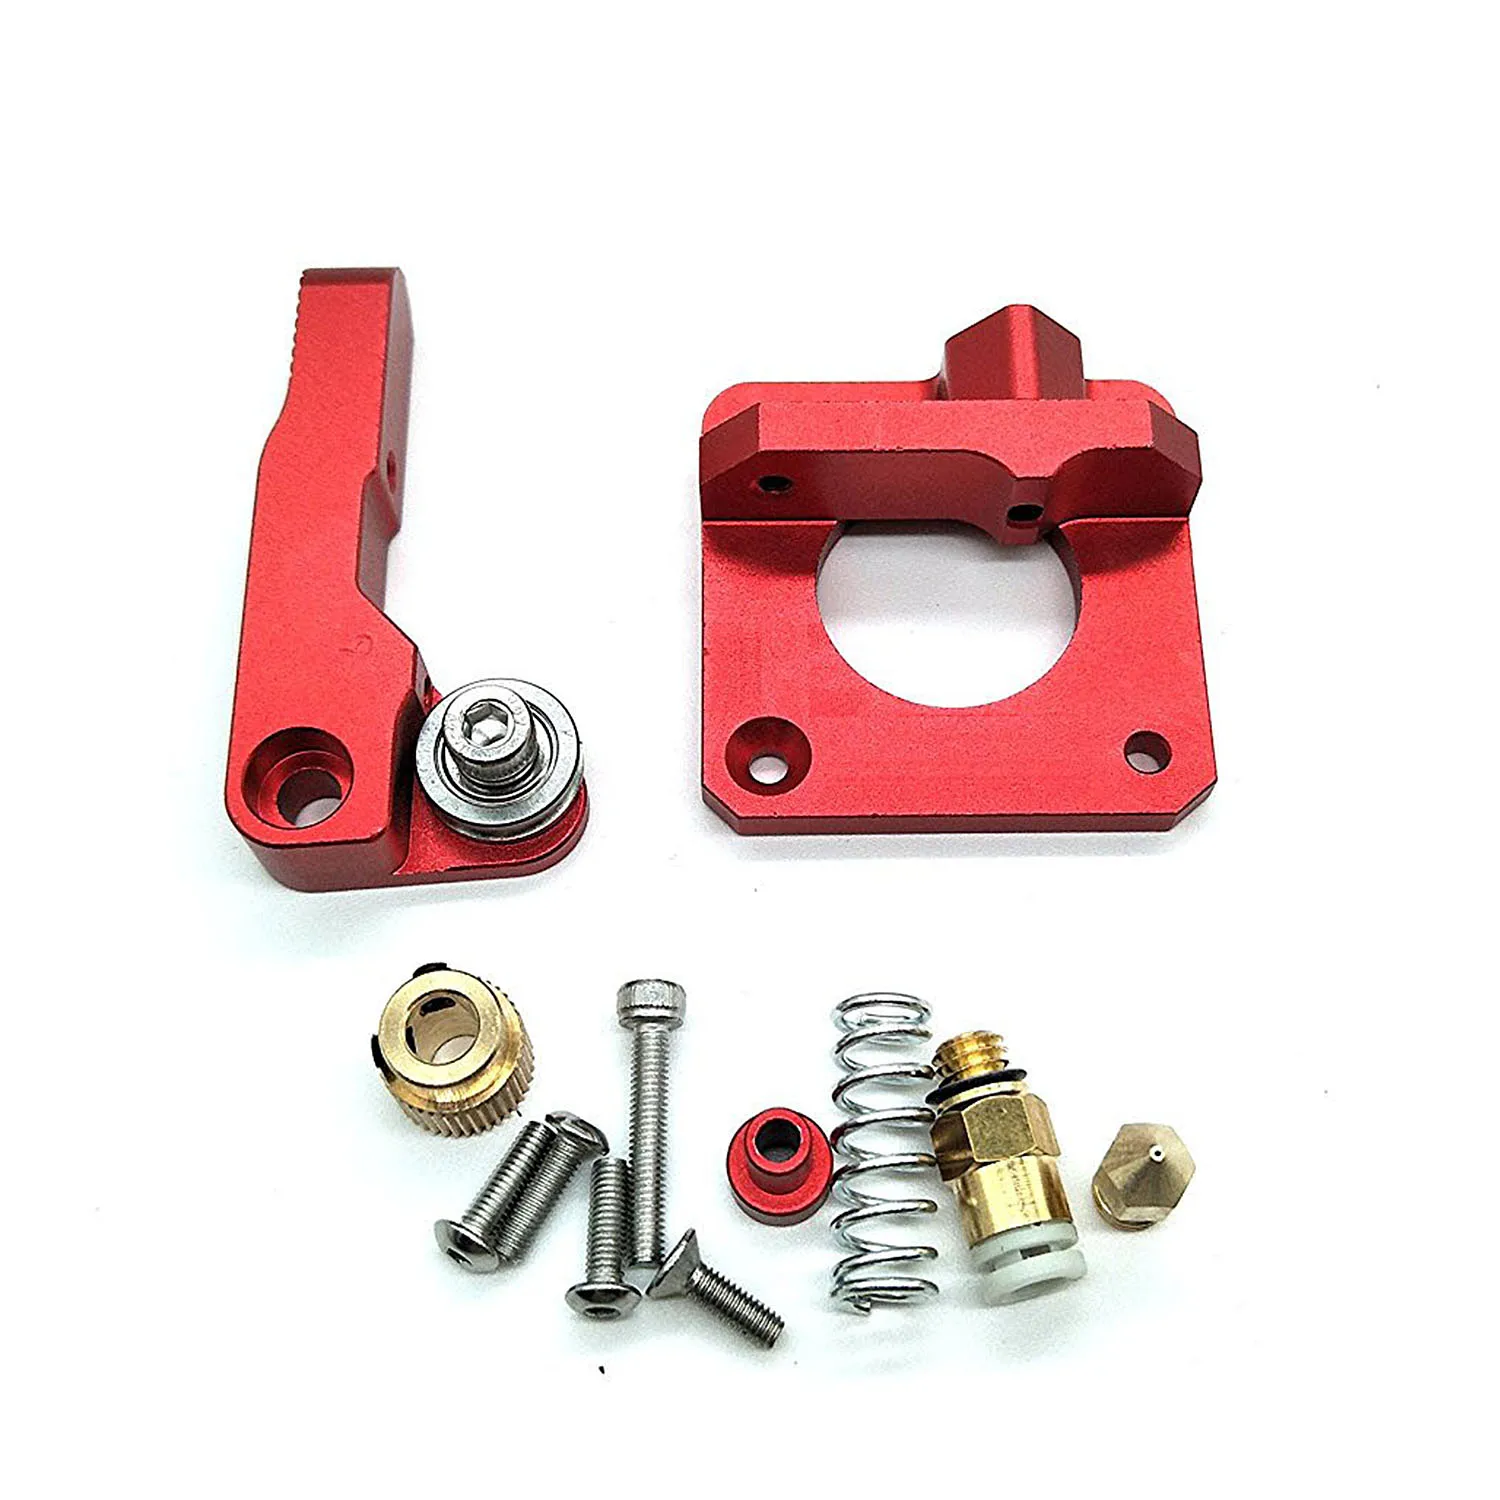 Upgrade Aluminum Extruder Drive Feed Frame For Creality 3D Printer Left//Right